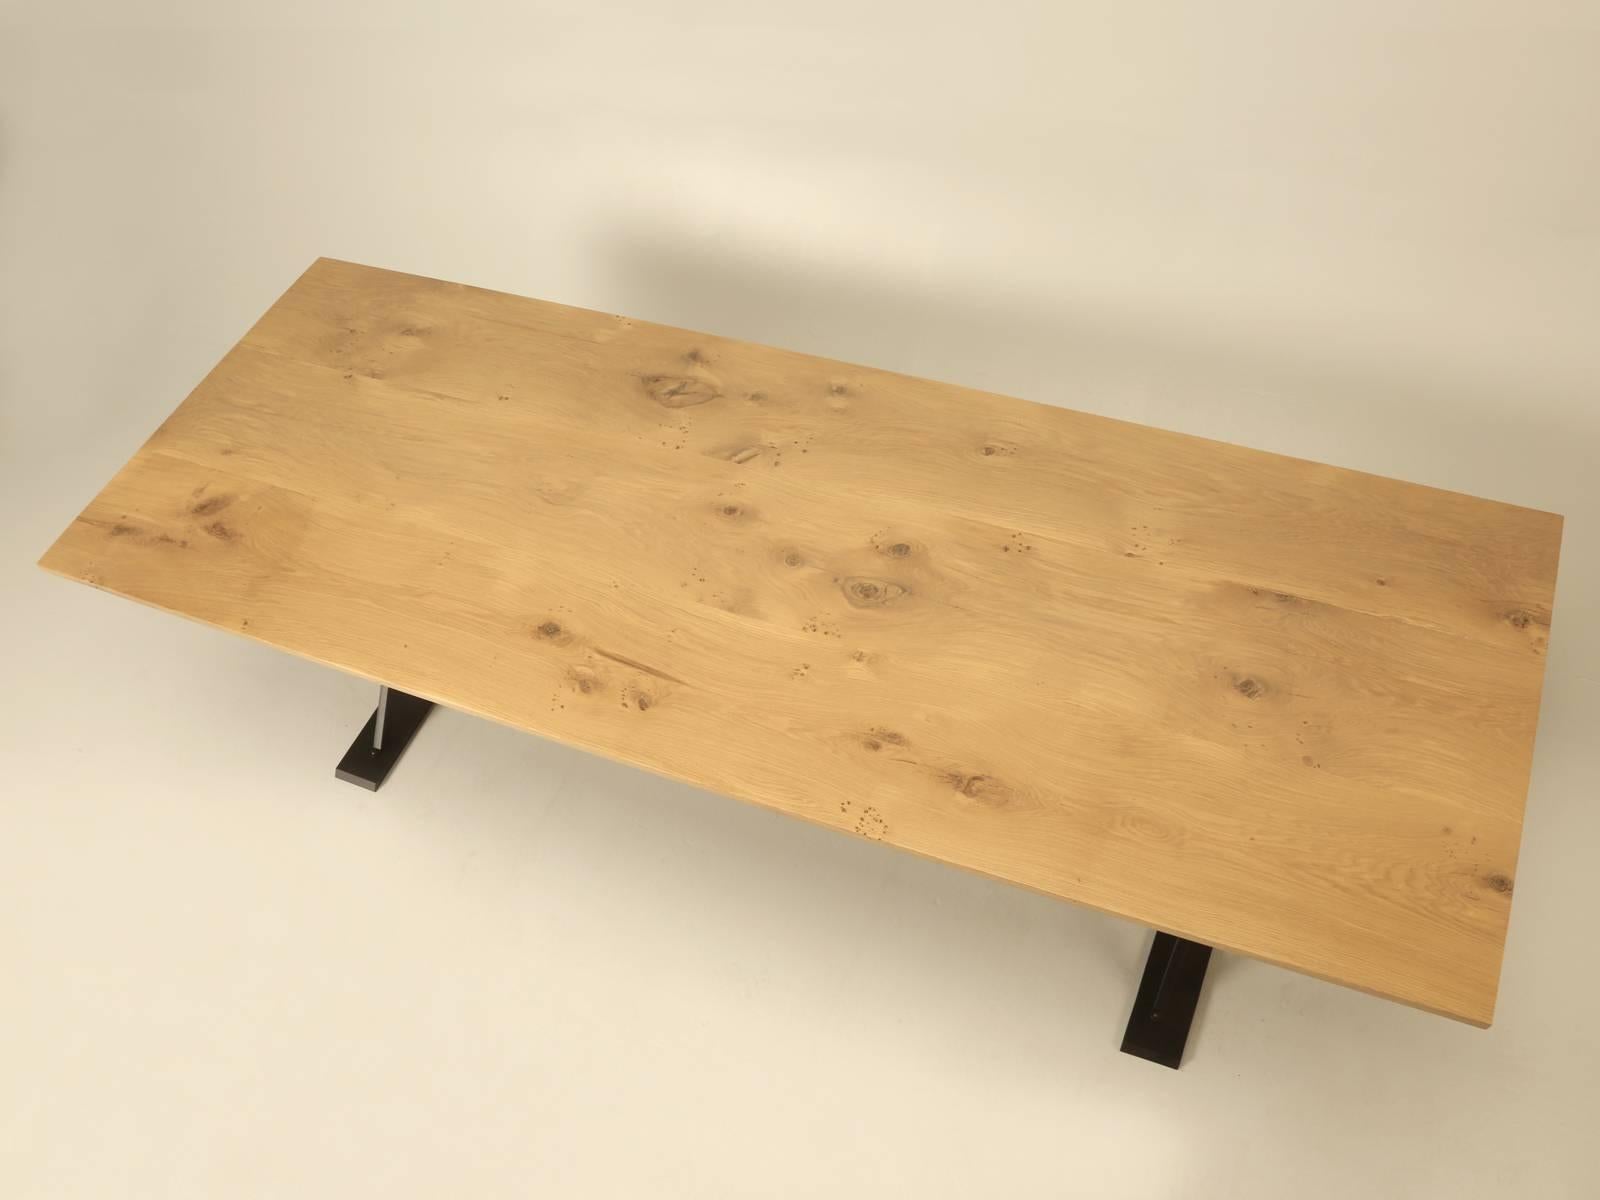 Newly constructed by our in house, Old Plank Workshop, this handmade oak and steel Industrial style dining table, can be built in any dimension or wood type.